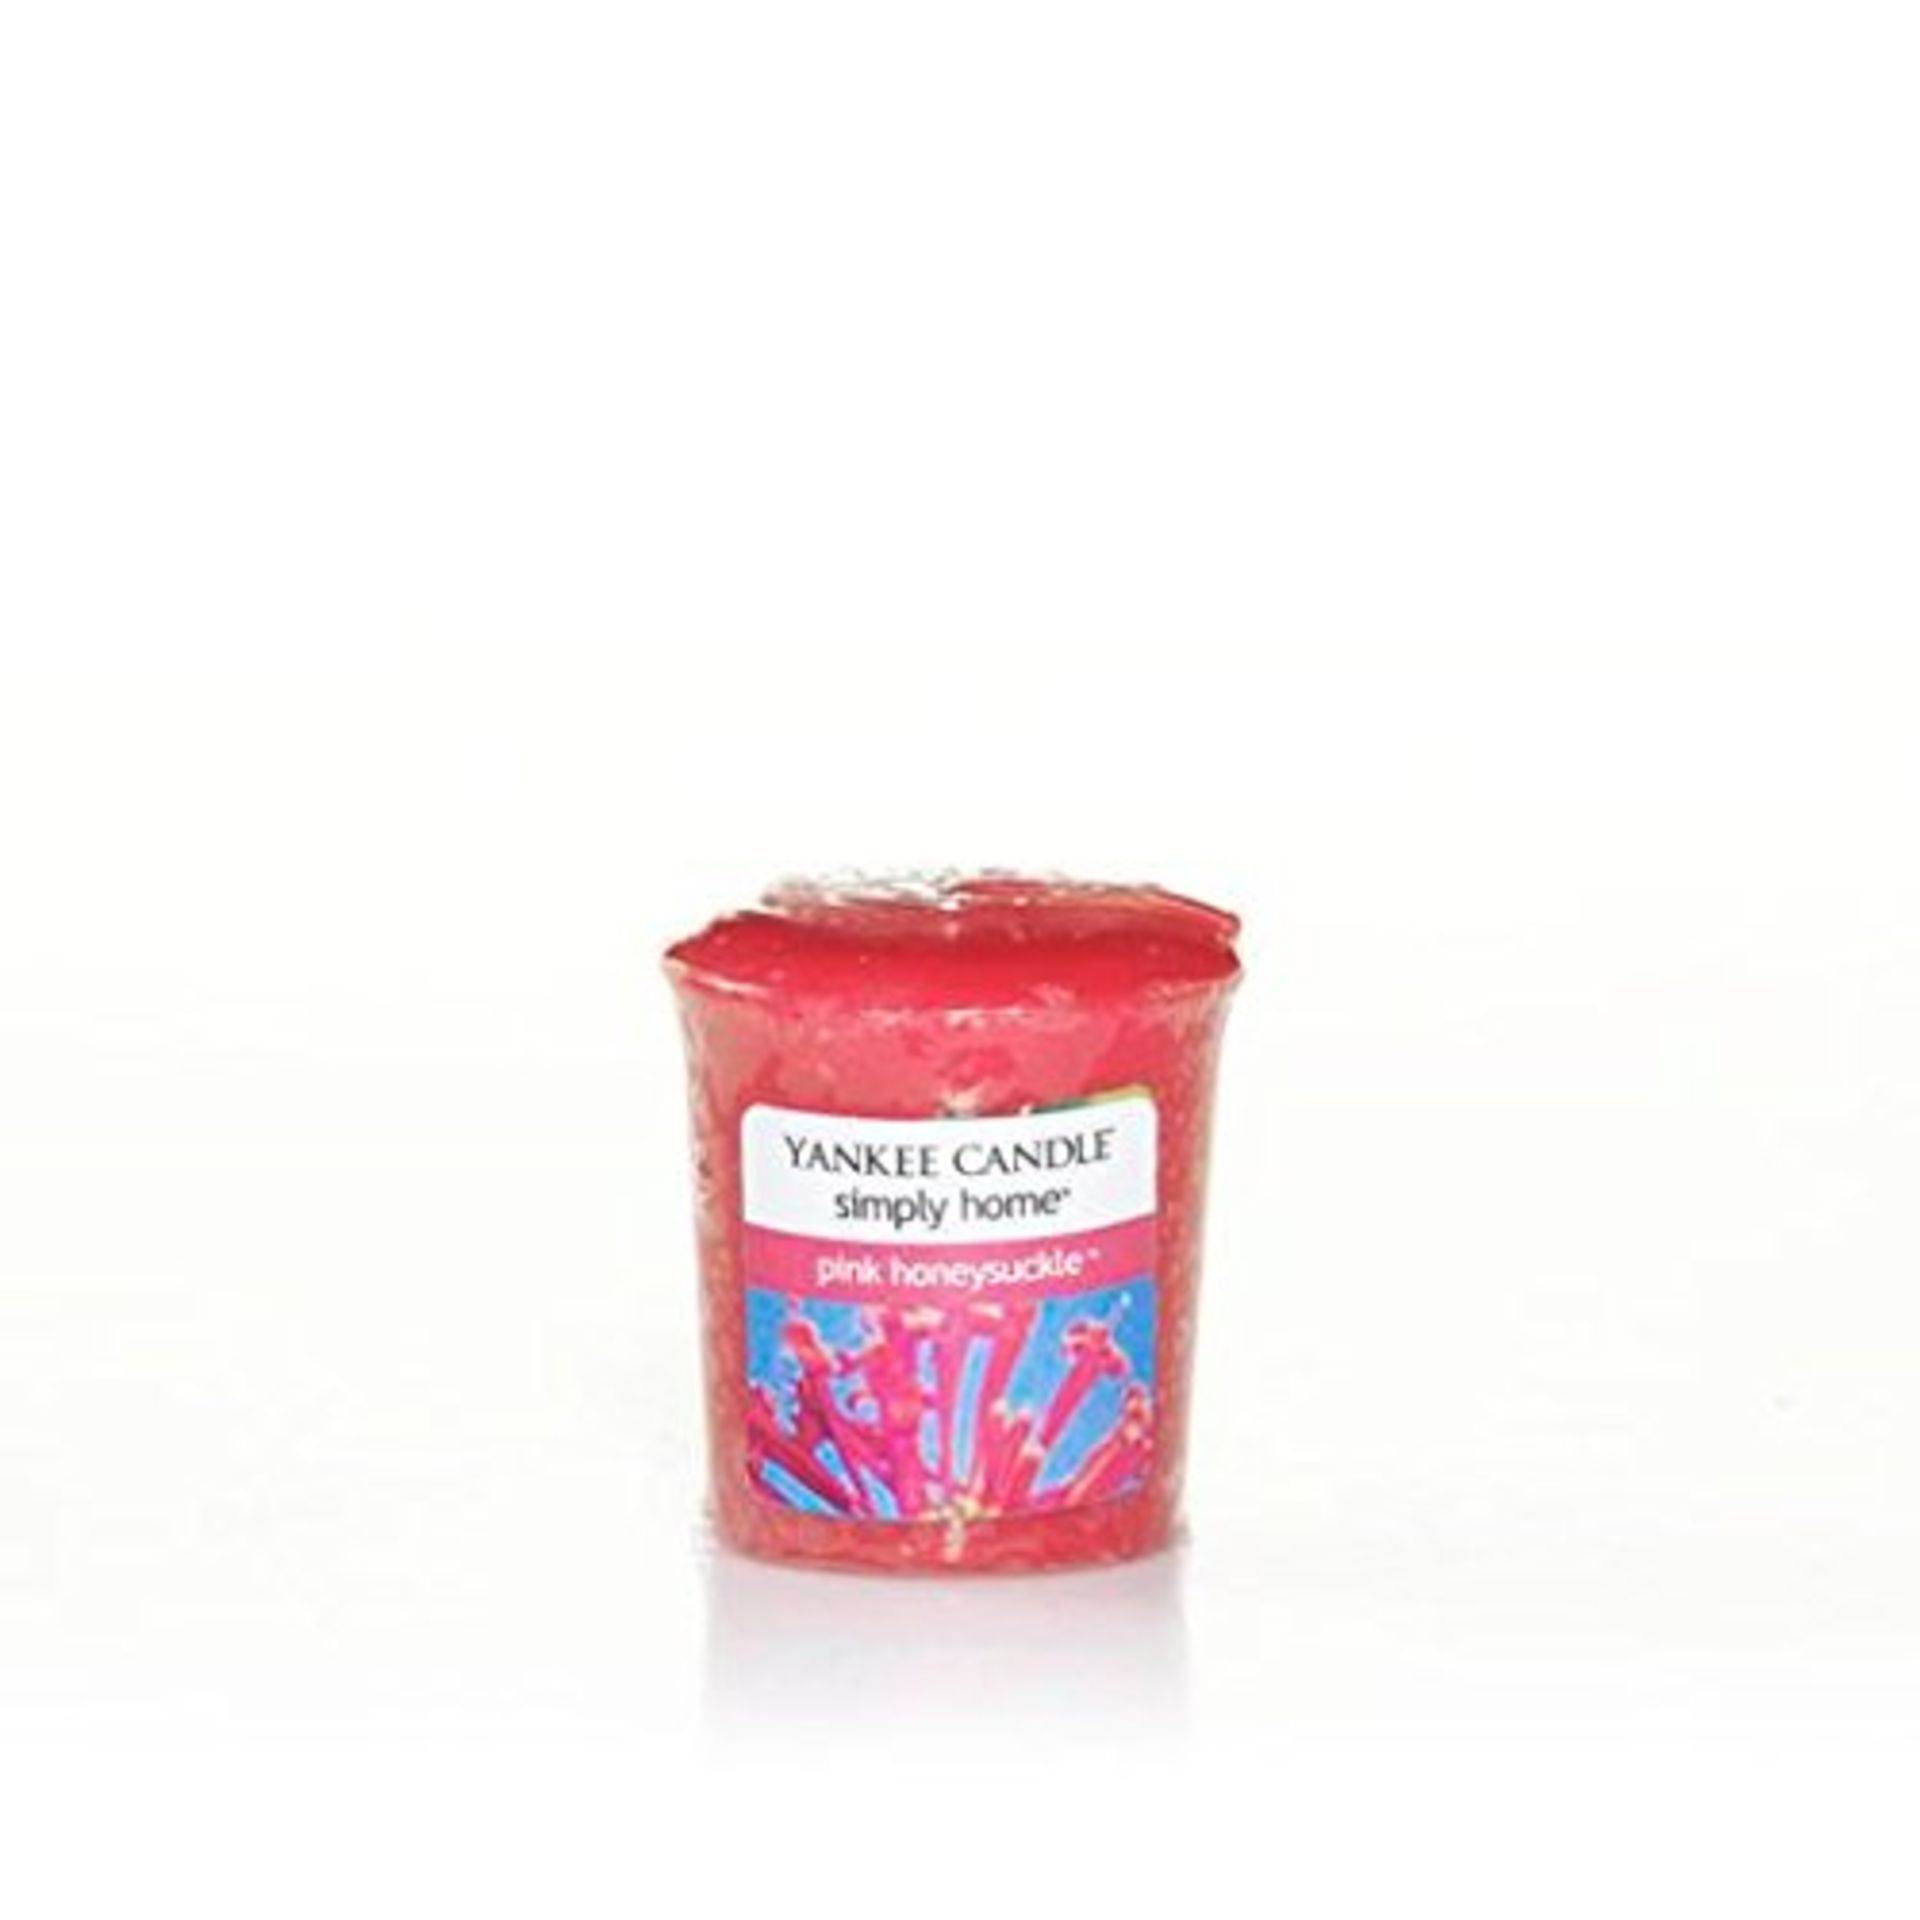 V *TRADE QTY* Brand New 18 x Yankee Candle Votive Pink Honeysuckle 49g Amazon Price £71.10 X 3 - Image 2 of 2